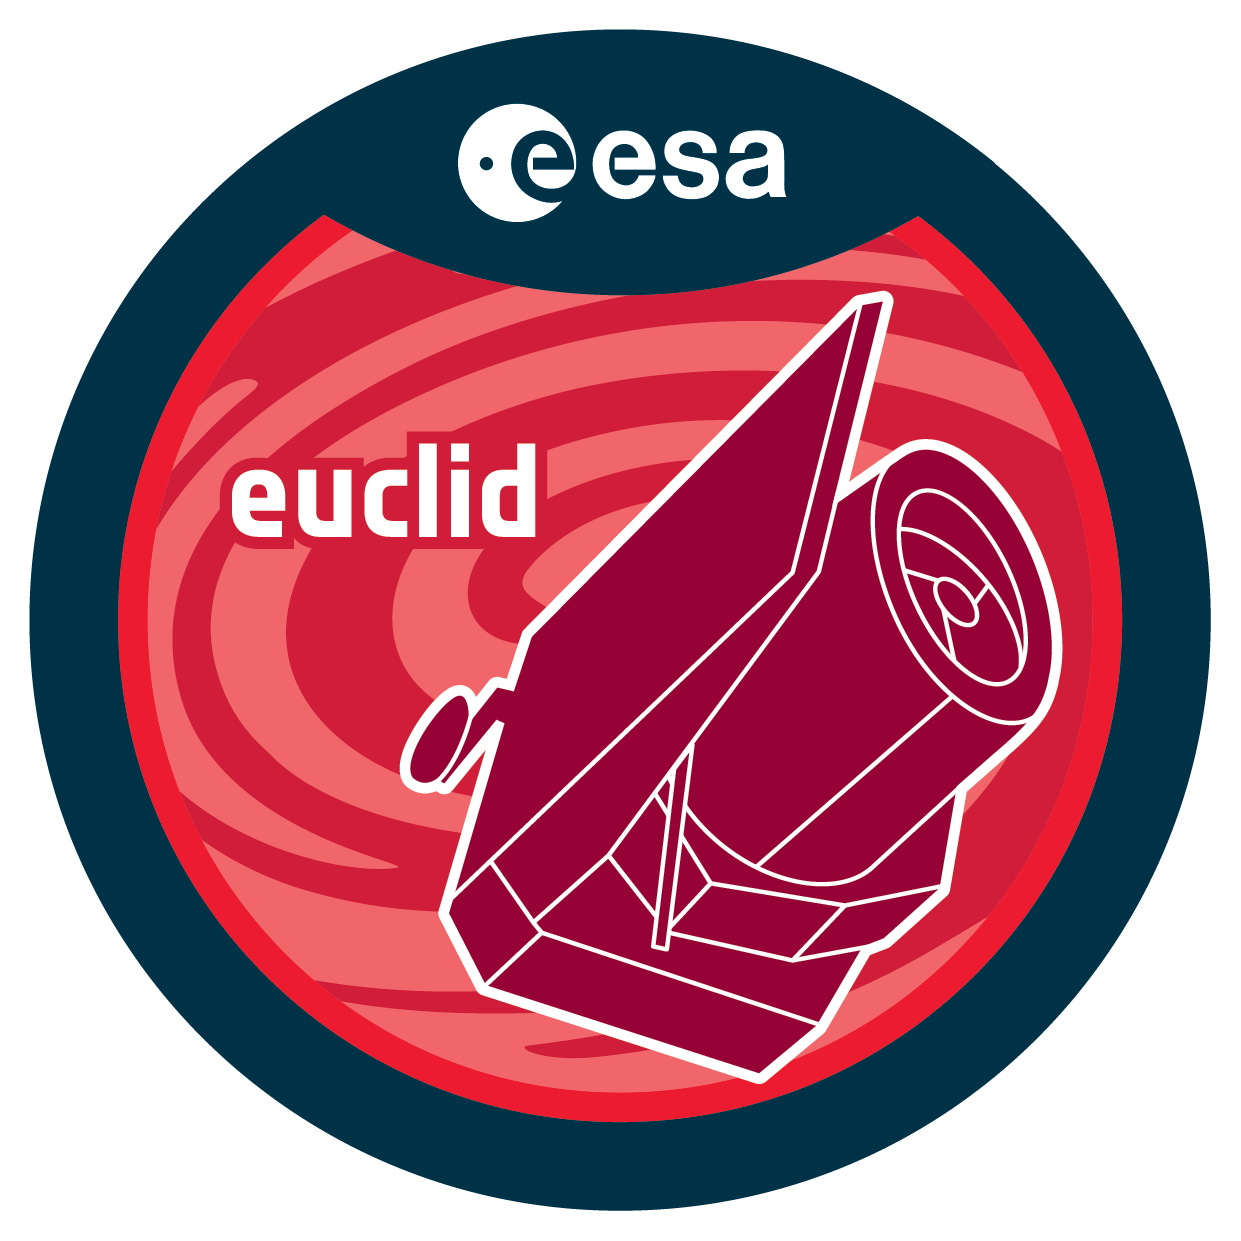 Mission patch for Euclid